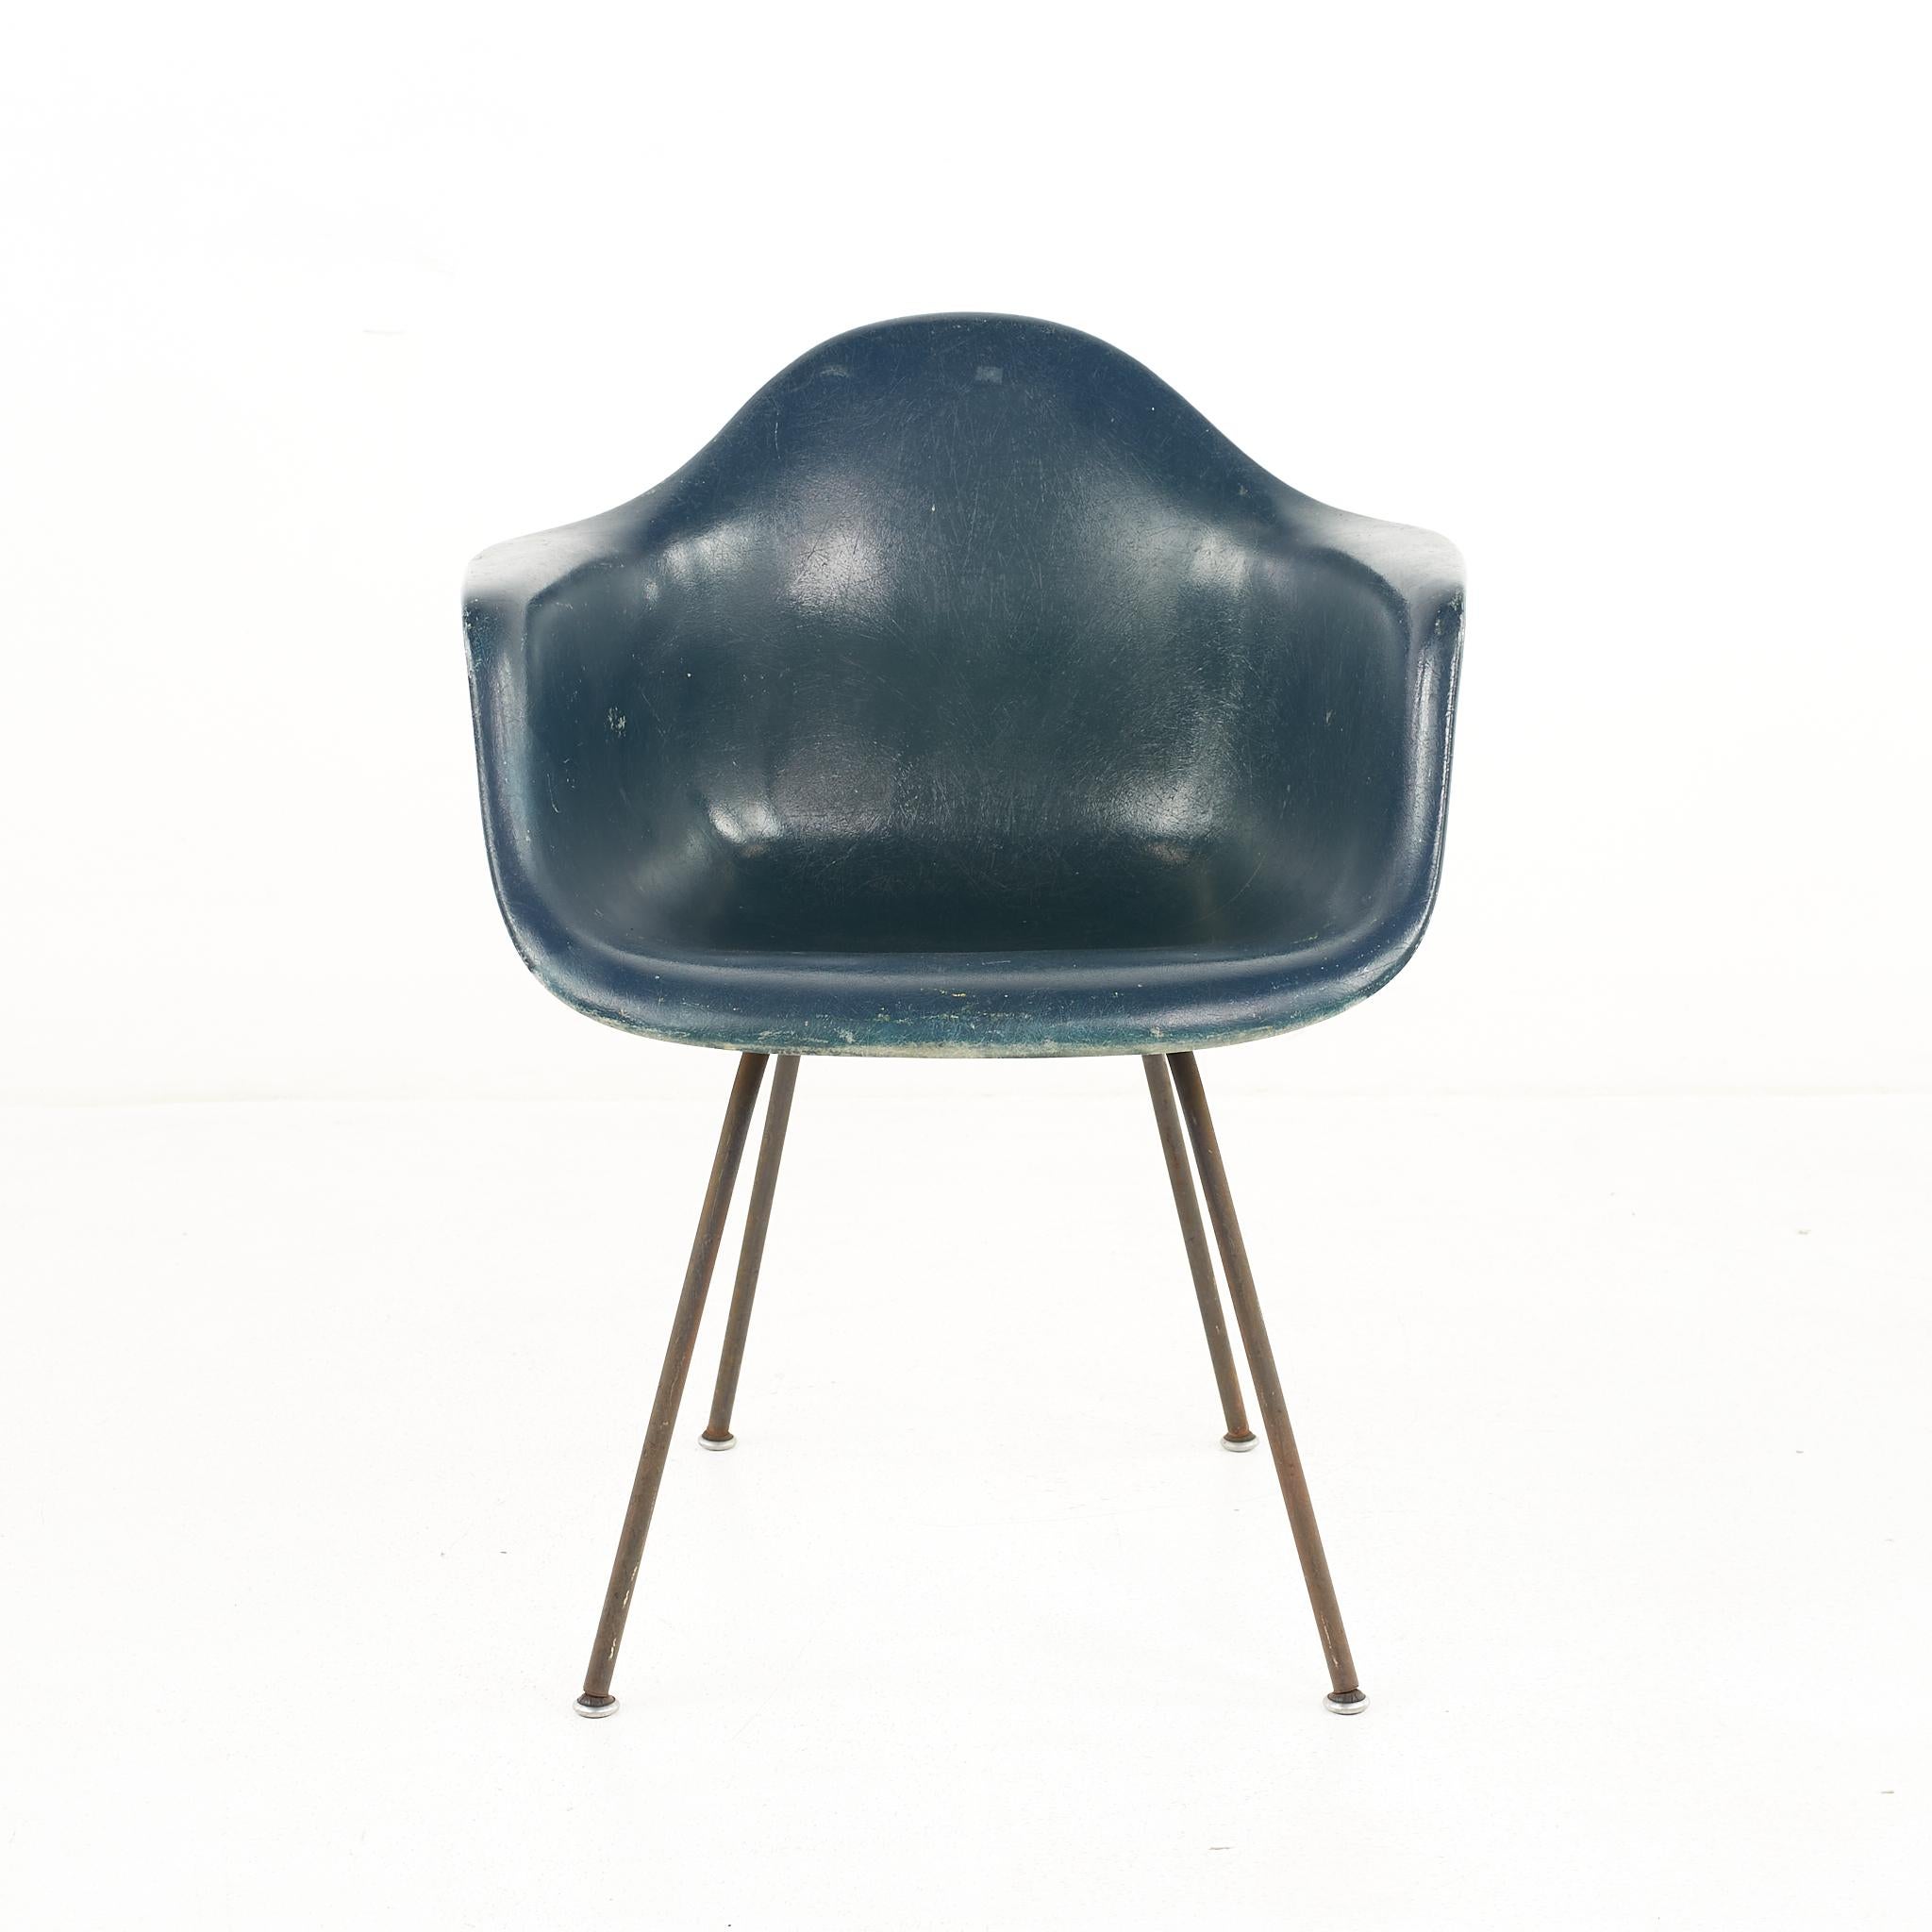 Eames for Herman Miller mid-century fiberglass green shell chair.

The chair measures: 24.75 wide x 22 deep x 31.25 high, with a seat height of 18 and arm height of 26 inches

All pieces of furniture can be had in what we call restored vintage